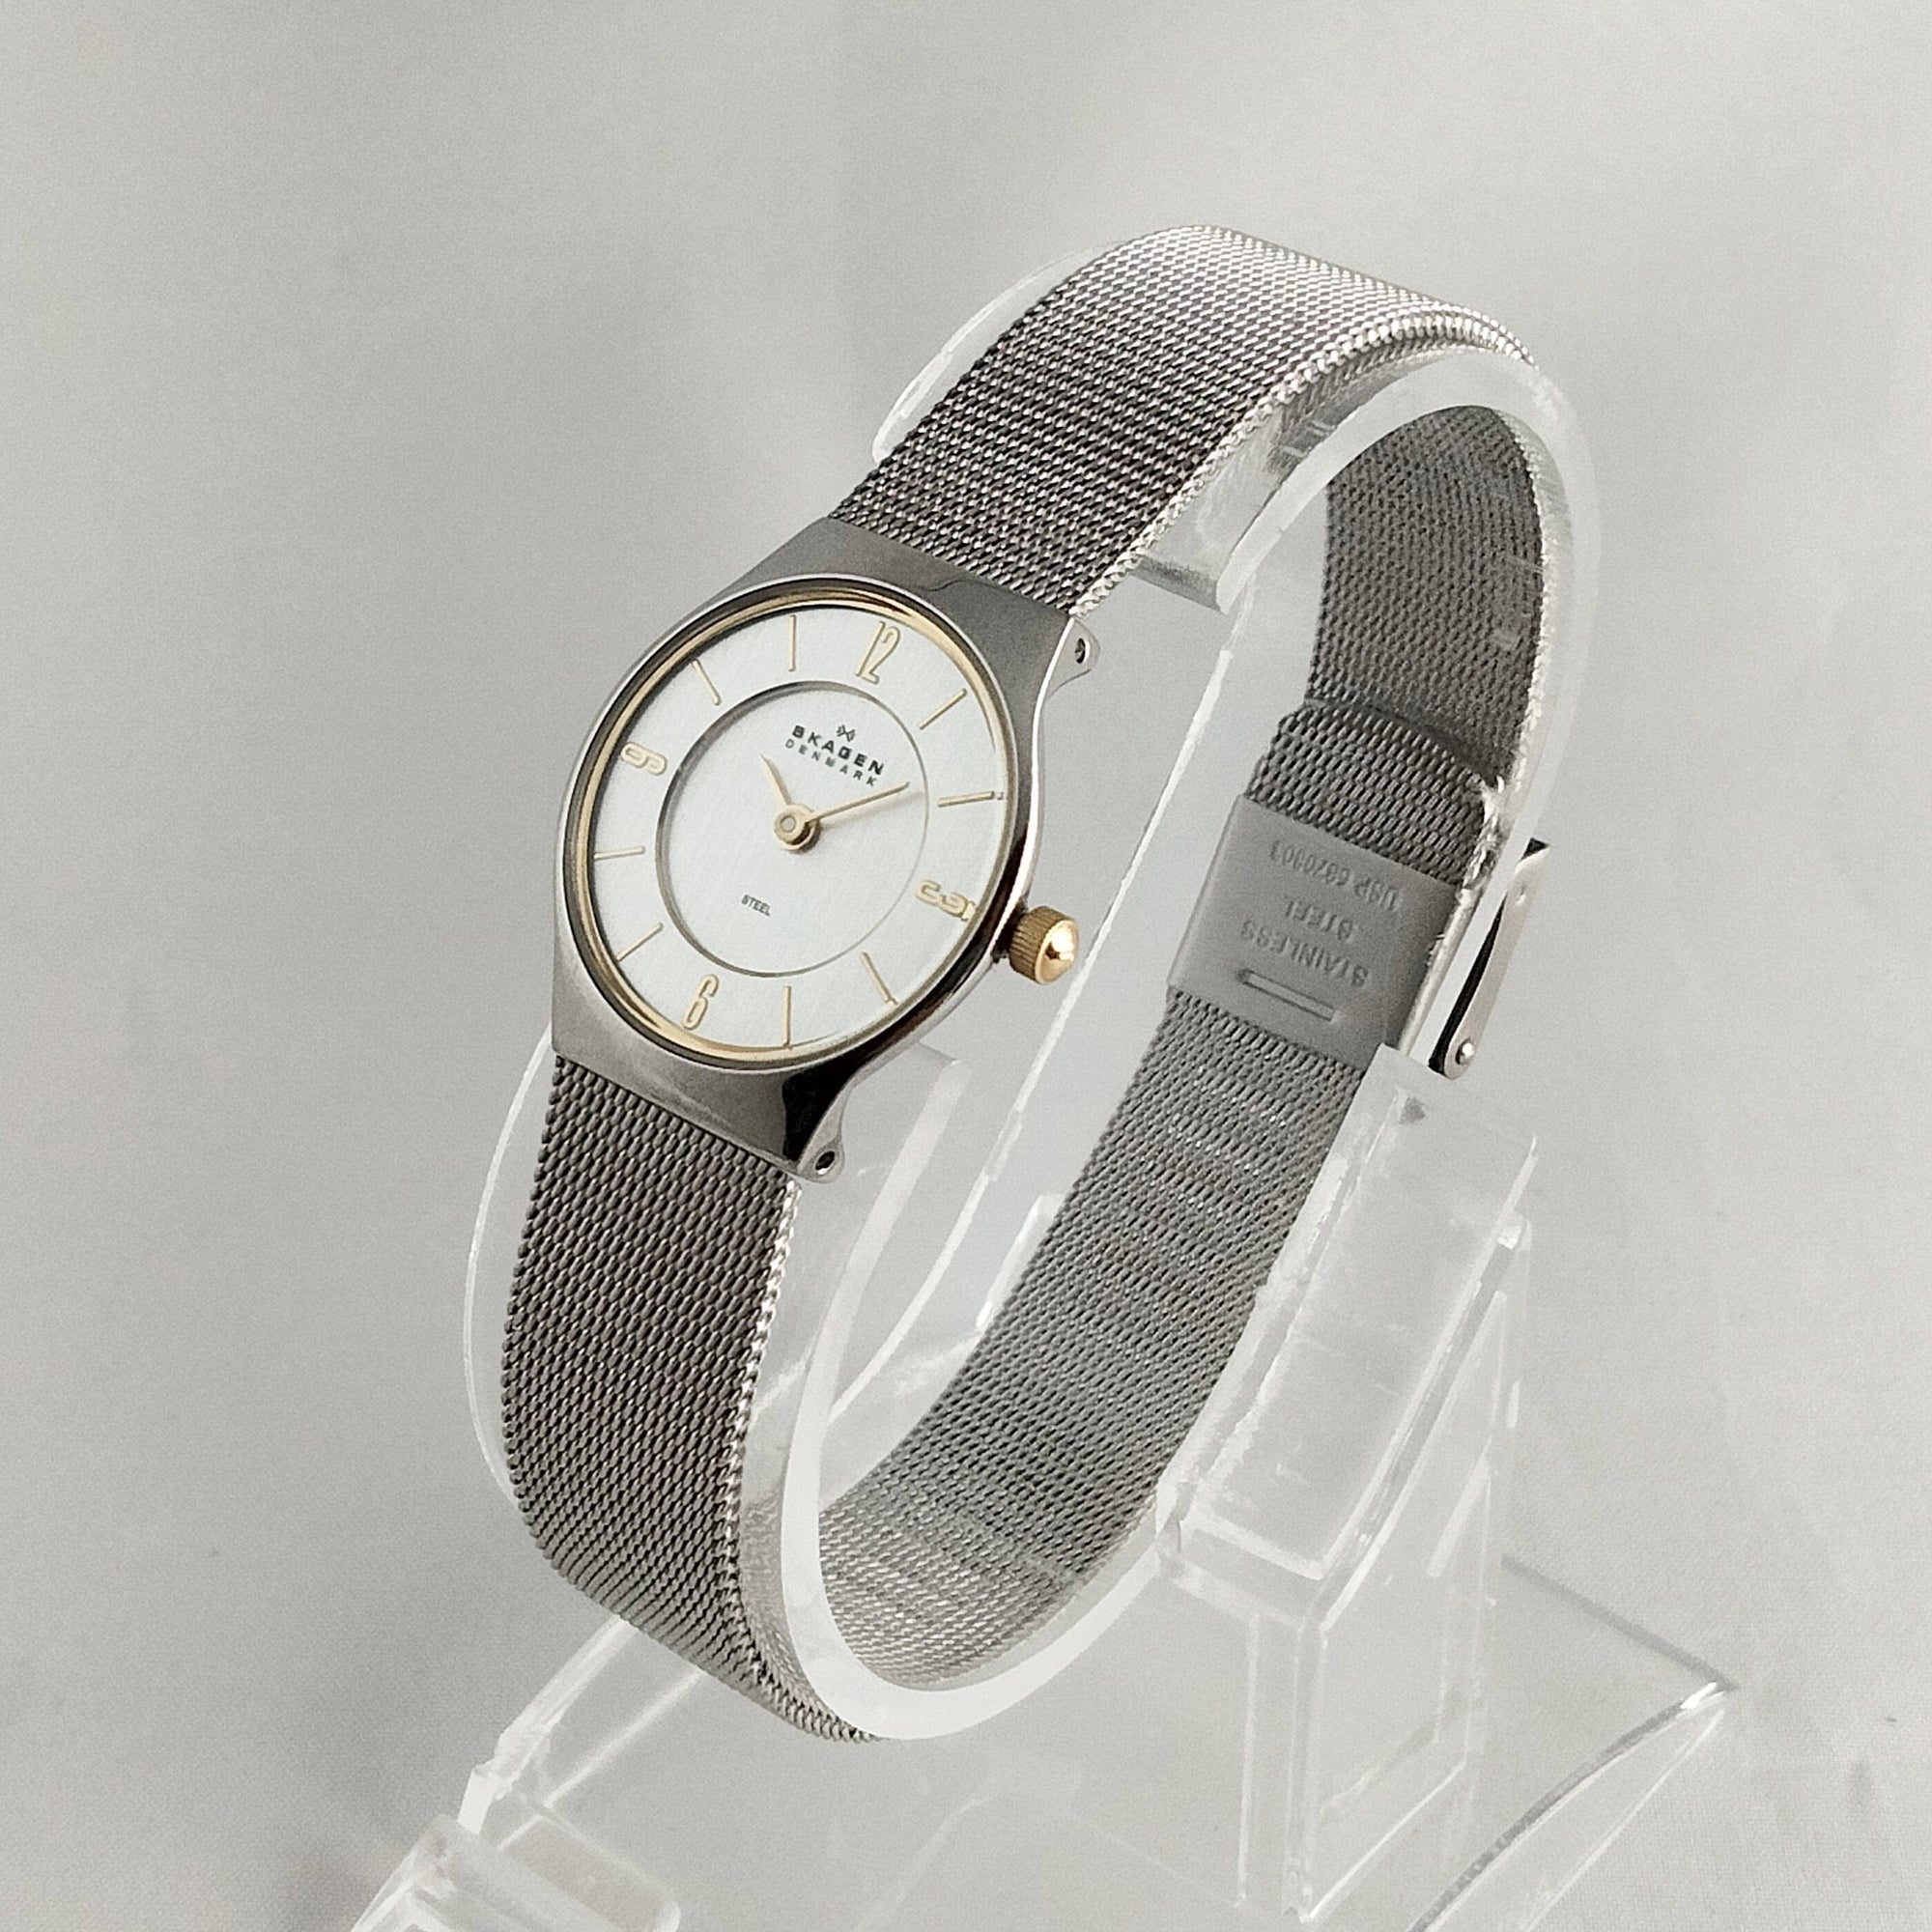 I Like Mikes Mid Century Modern Watches Skagen Stainless Steel Unisex Watch, Gold Tone Details, Mesh Strap